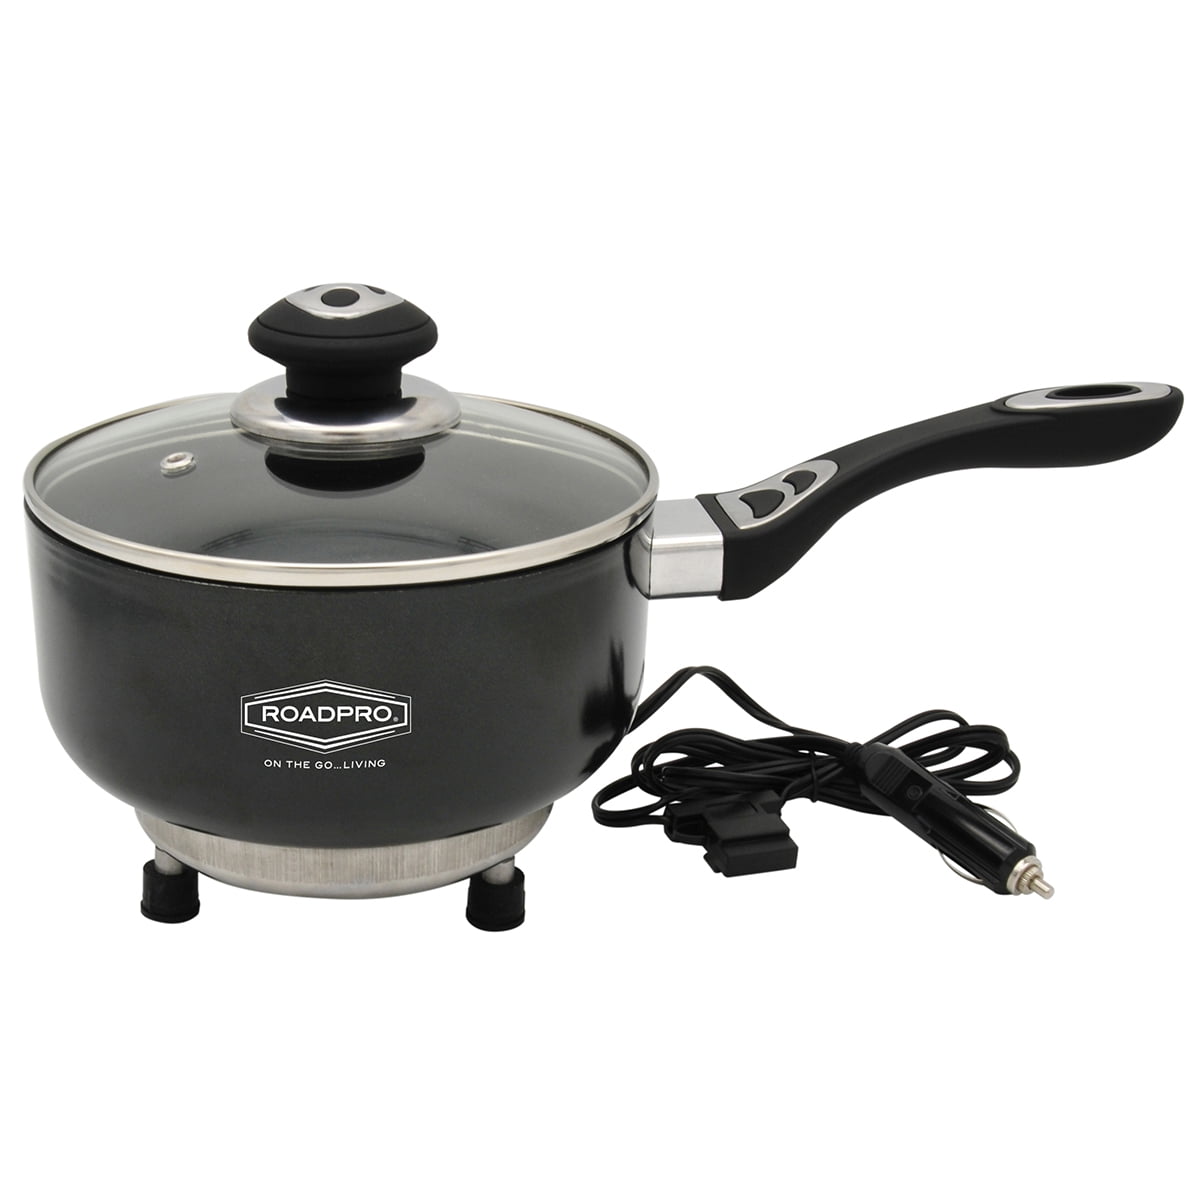 Rpsp225ns 12v Portable Sauce Pan With Non-stick Surface